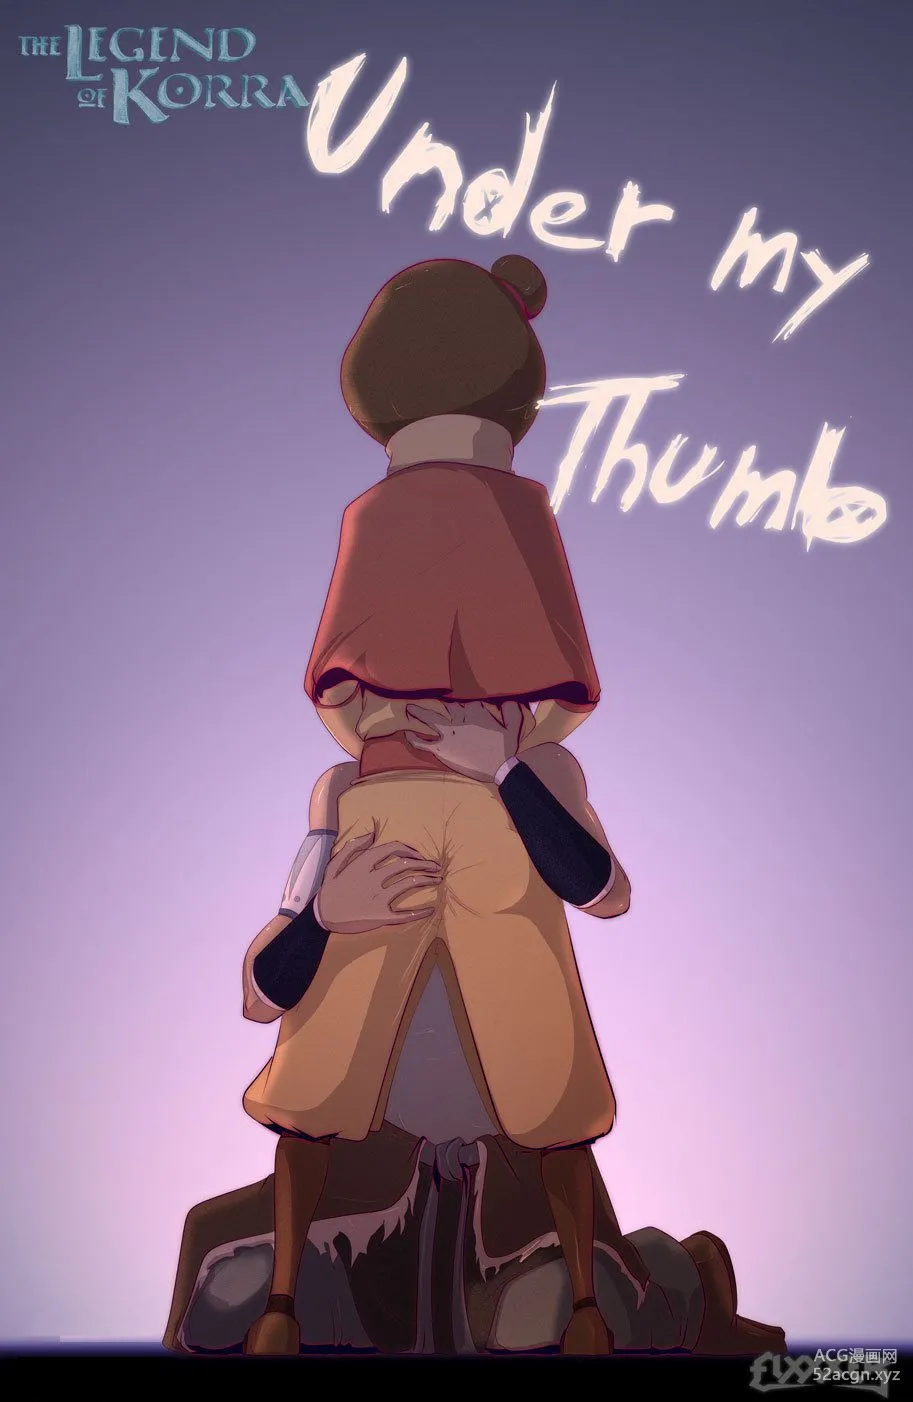 Under My Thumb - Chapter 1 (The Legend Of Korra)